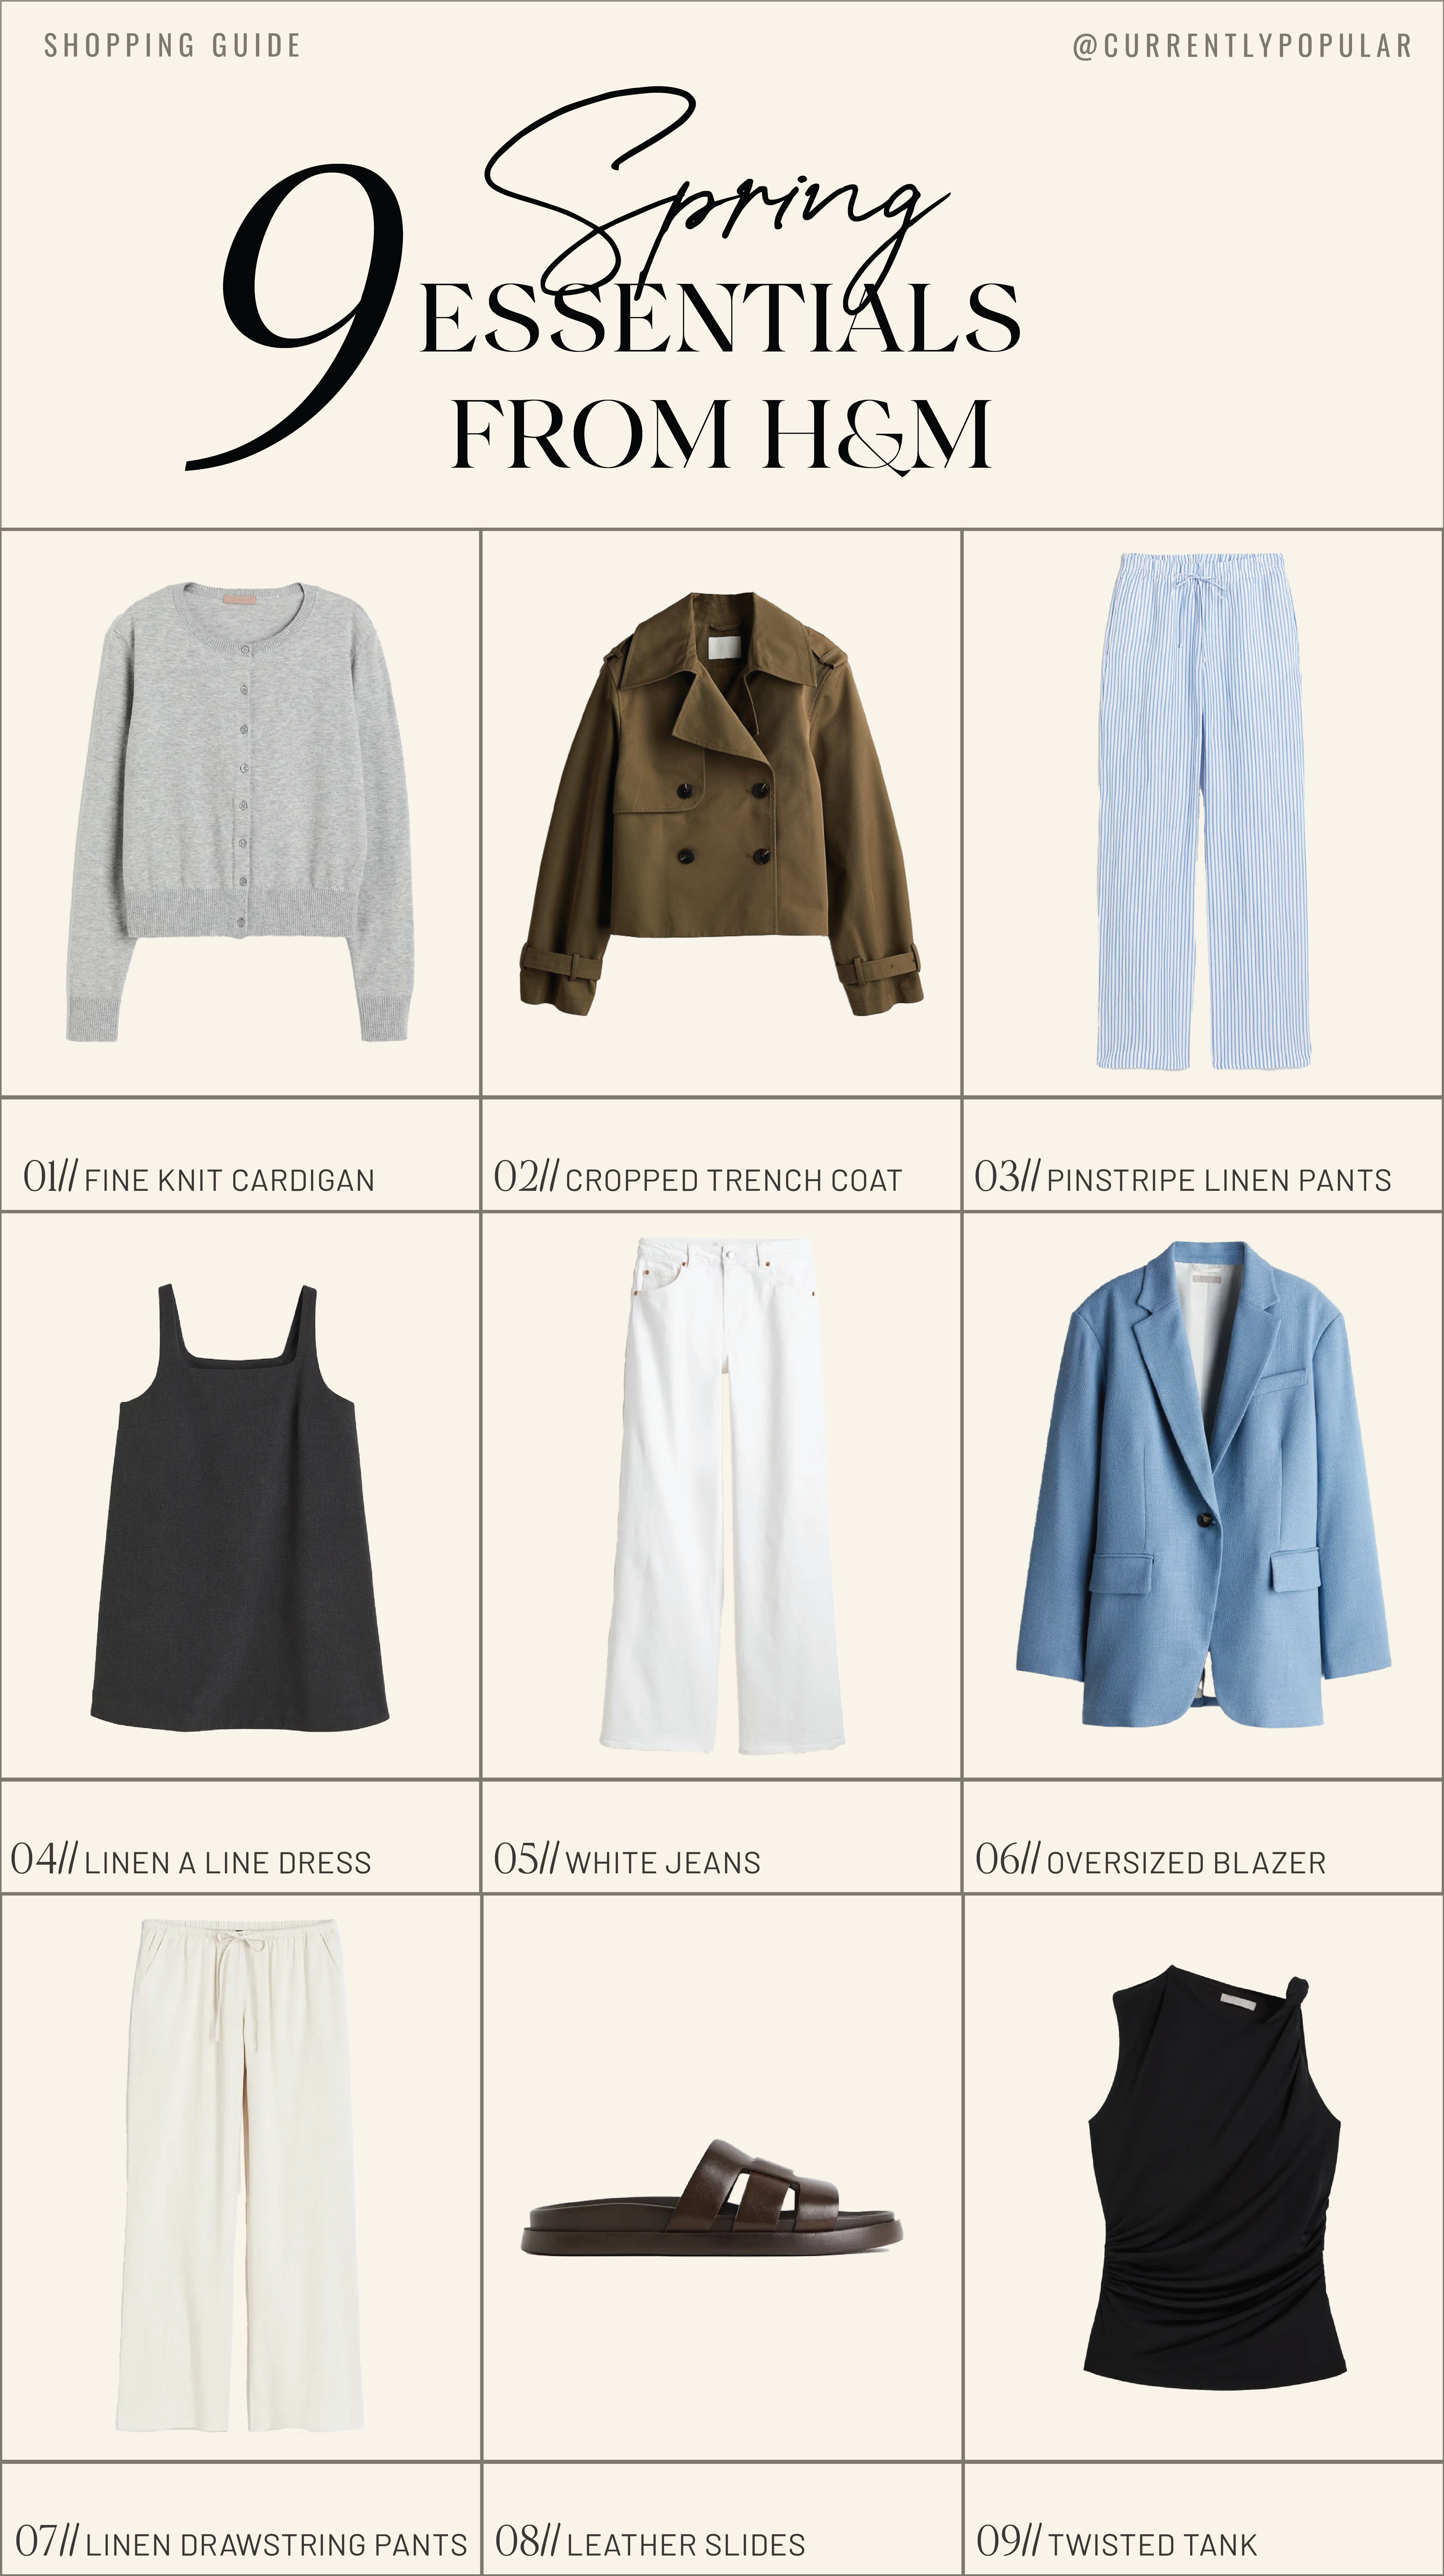 9 Spring Essentials from H&M. A interactive shopping guide to help inspire your next Spring look.